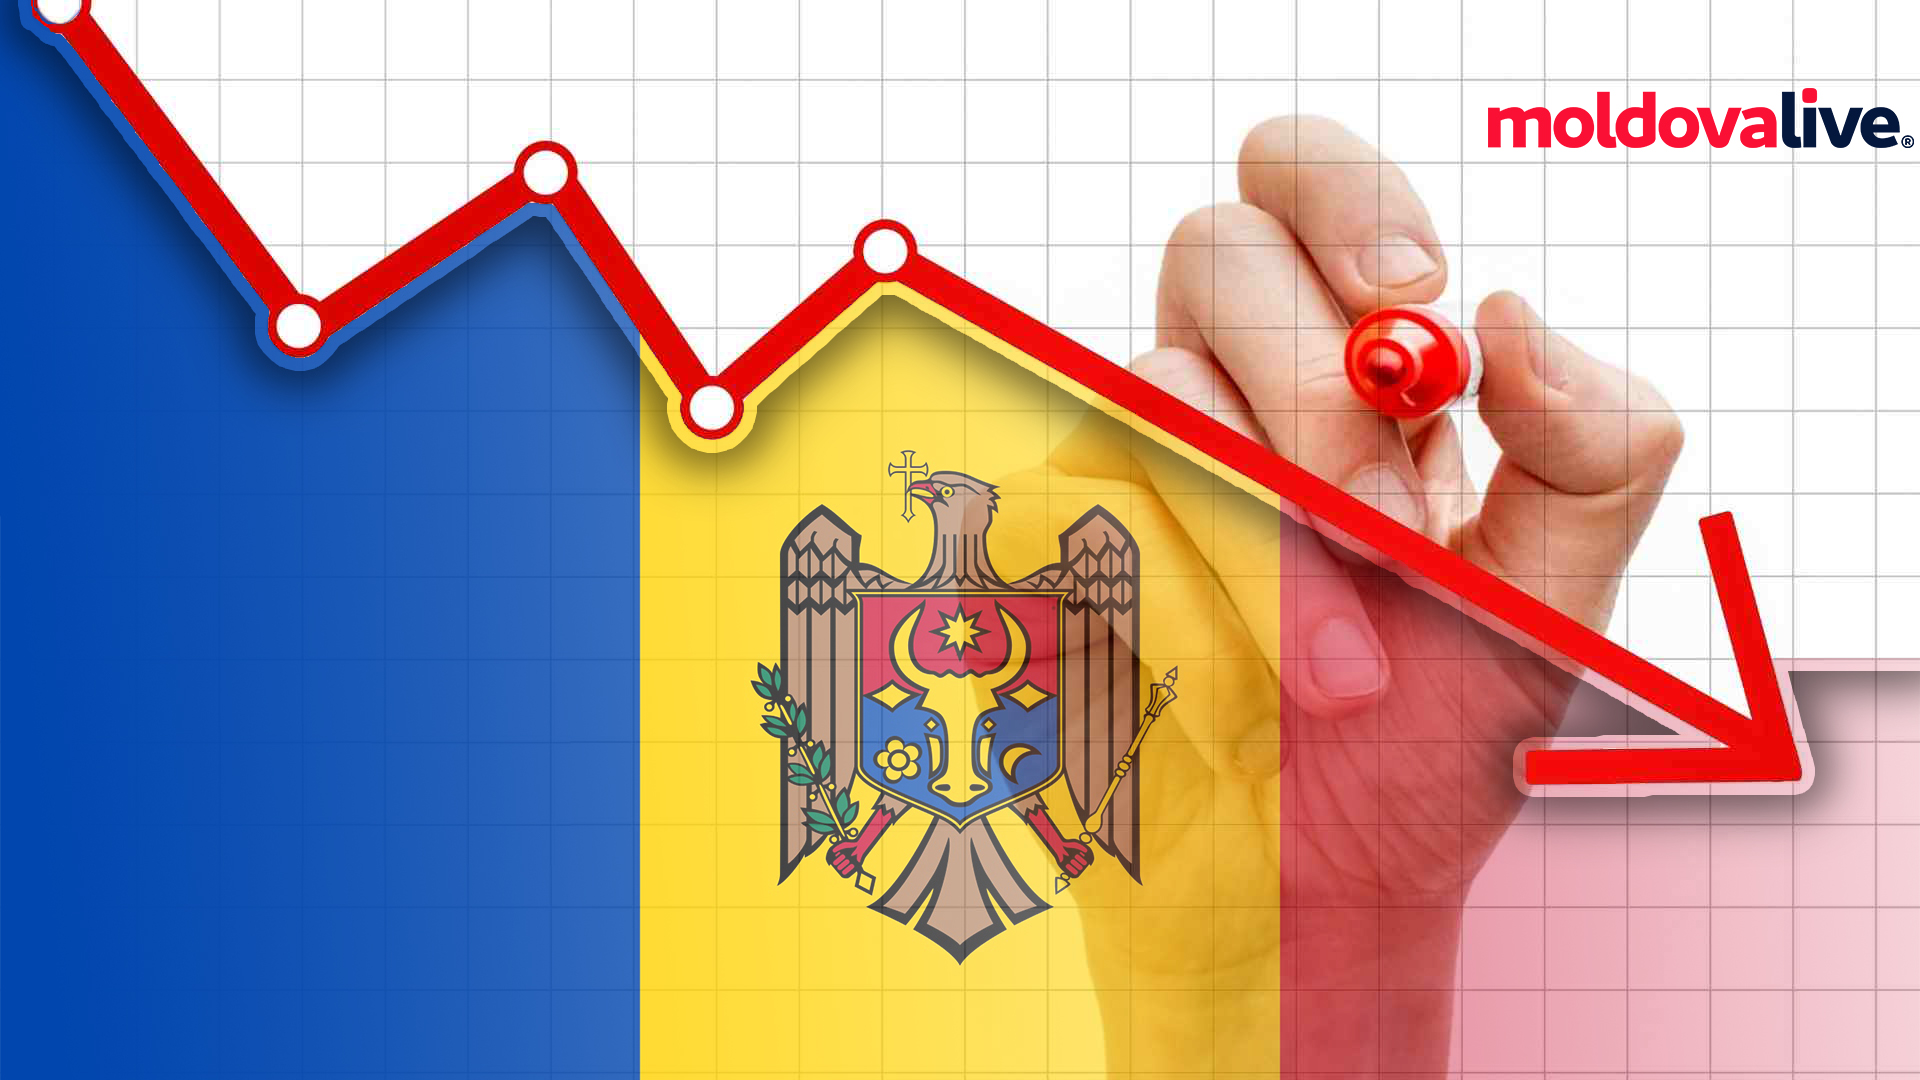 What is Moldova’s position in the global GDP ranking per citizen?